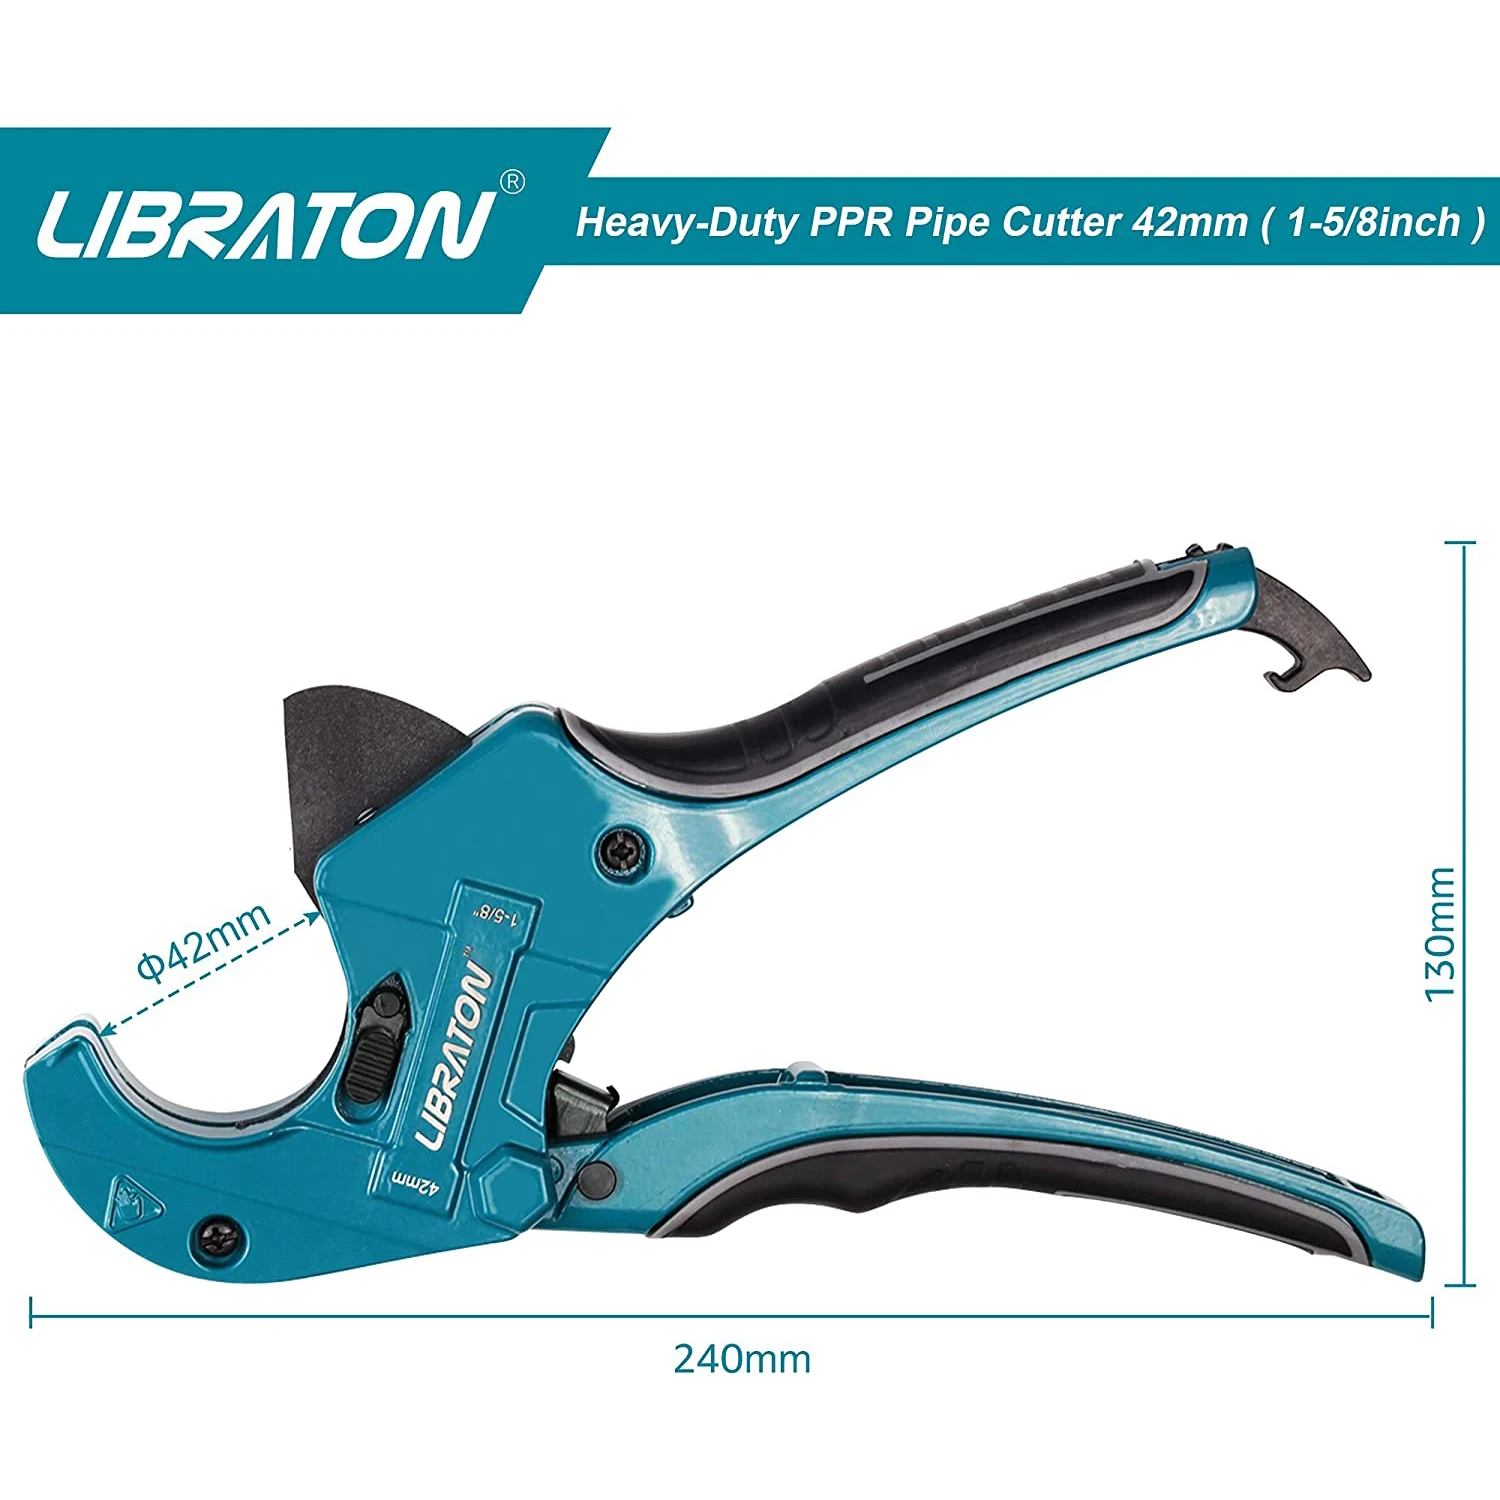 Libraton Pipe Cutter, Plastic Pipe Cutter 42mm, PVC Cutter with Replacement Blade, Pipe Cutting Tool with Ratchet Drive for Cutting PEX, PVC, Ppr